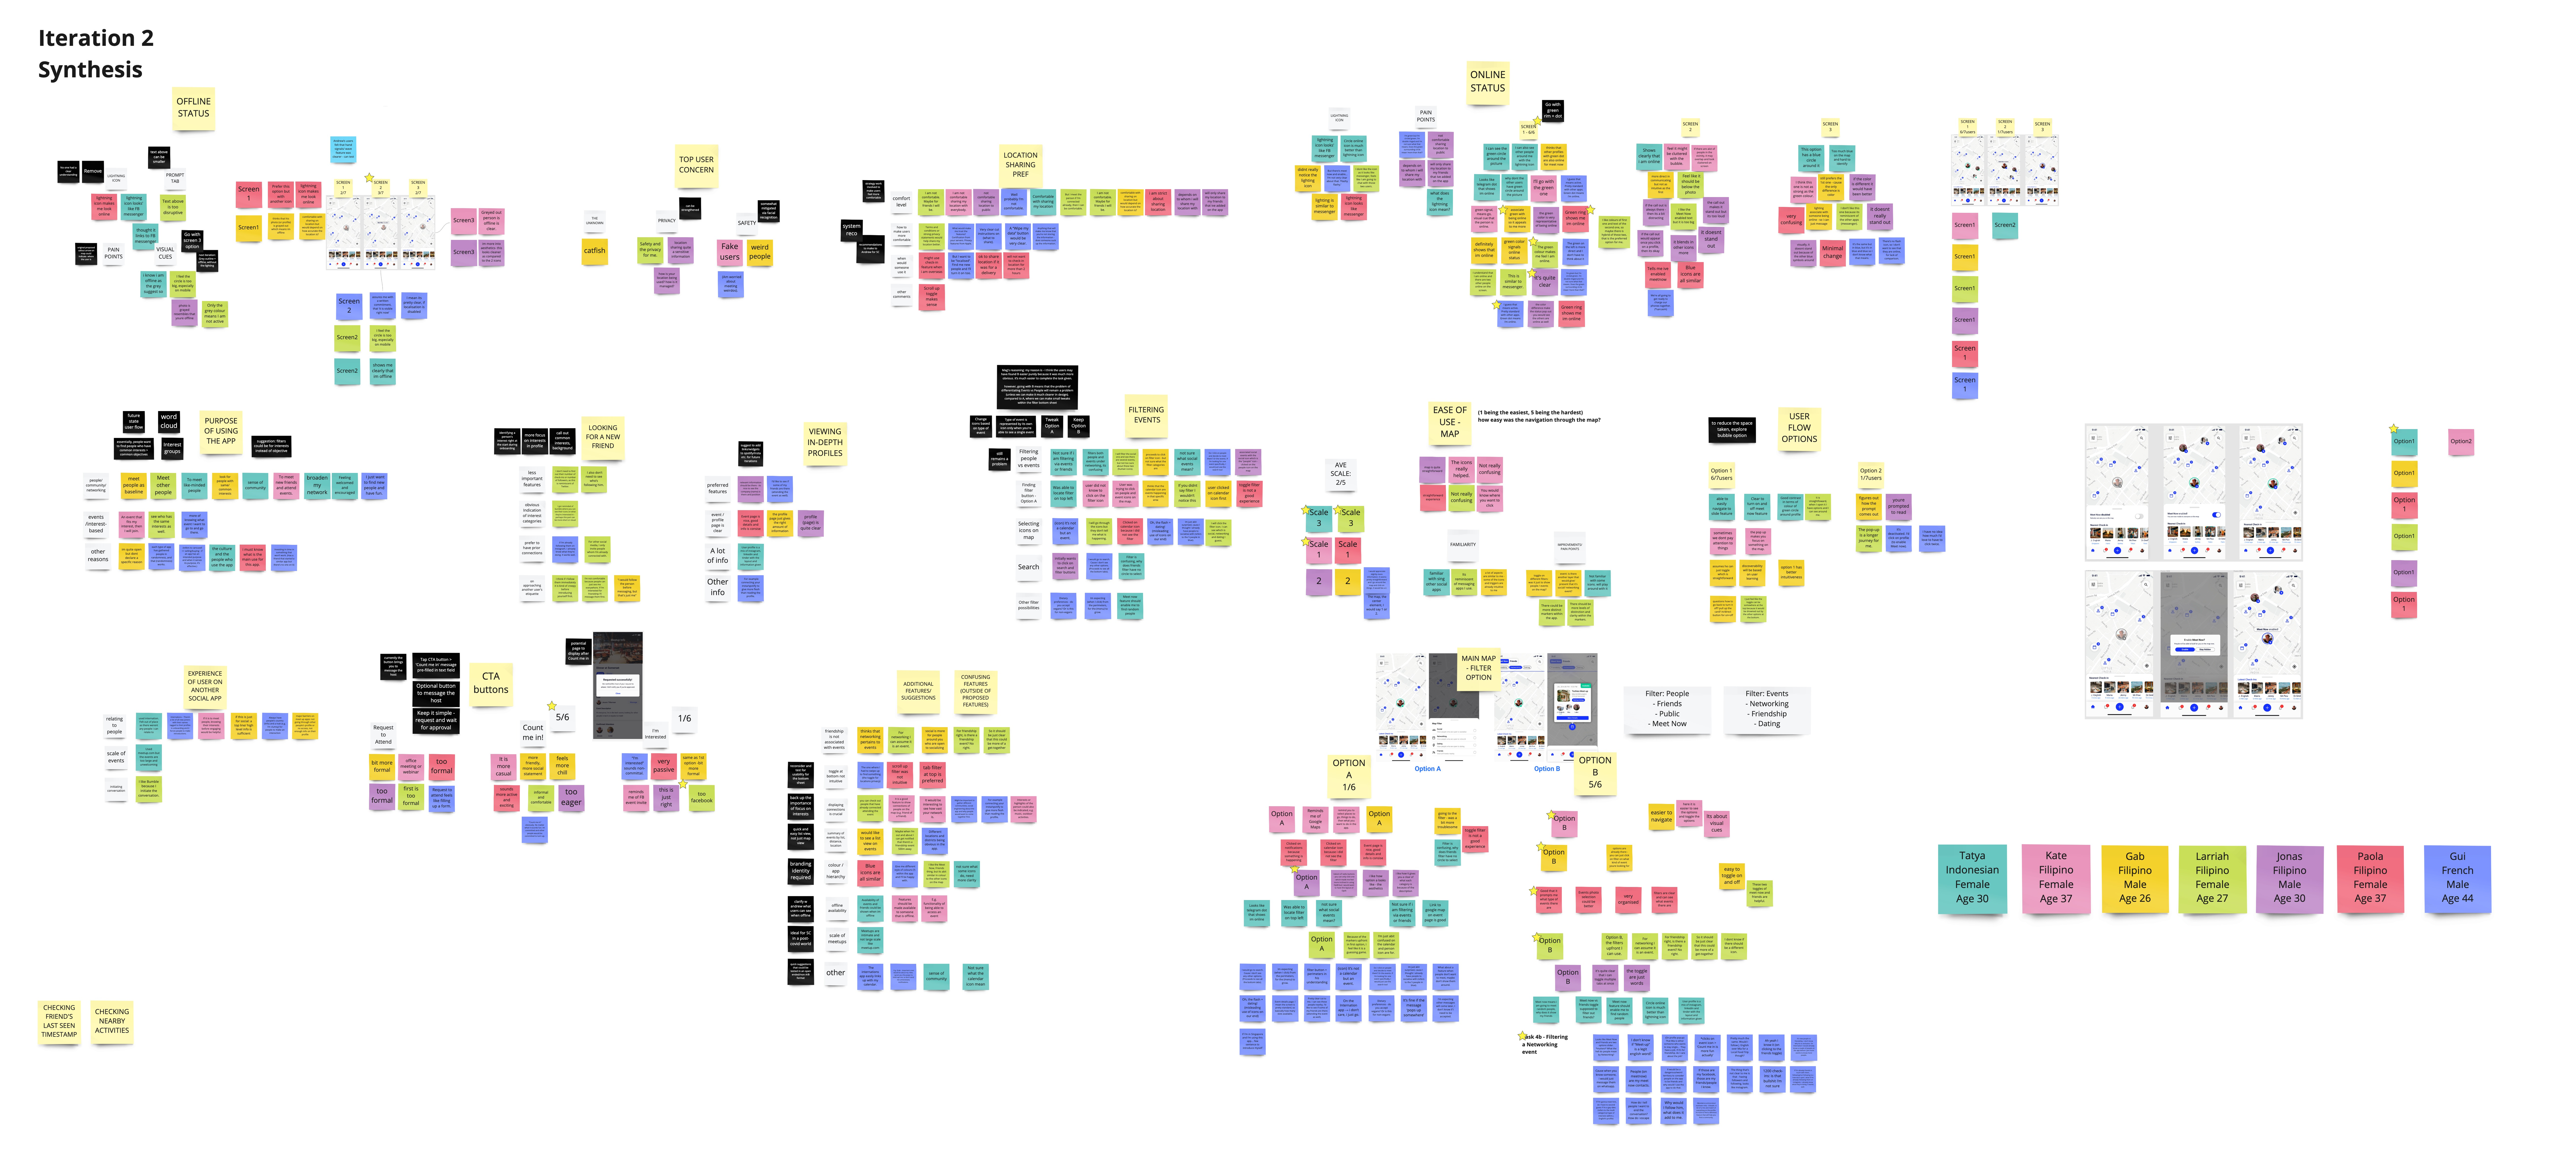 Affinity Mapping of User Interviews (Iteration 2)